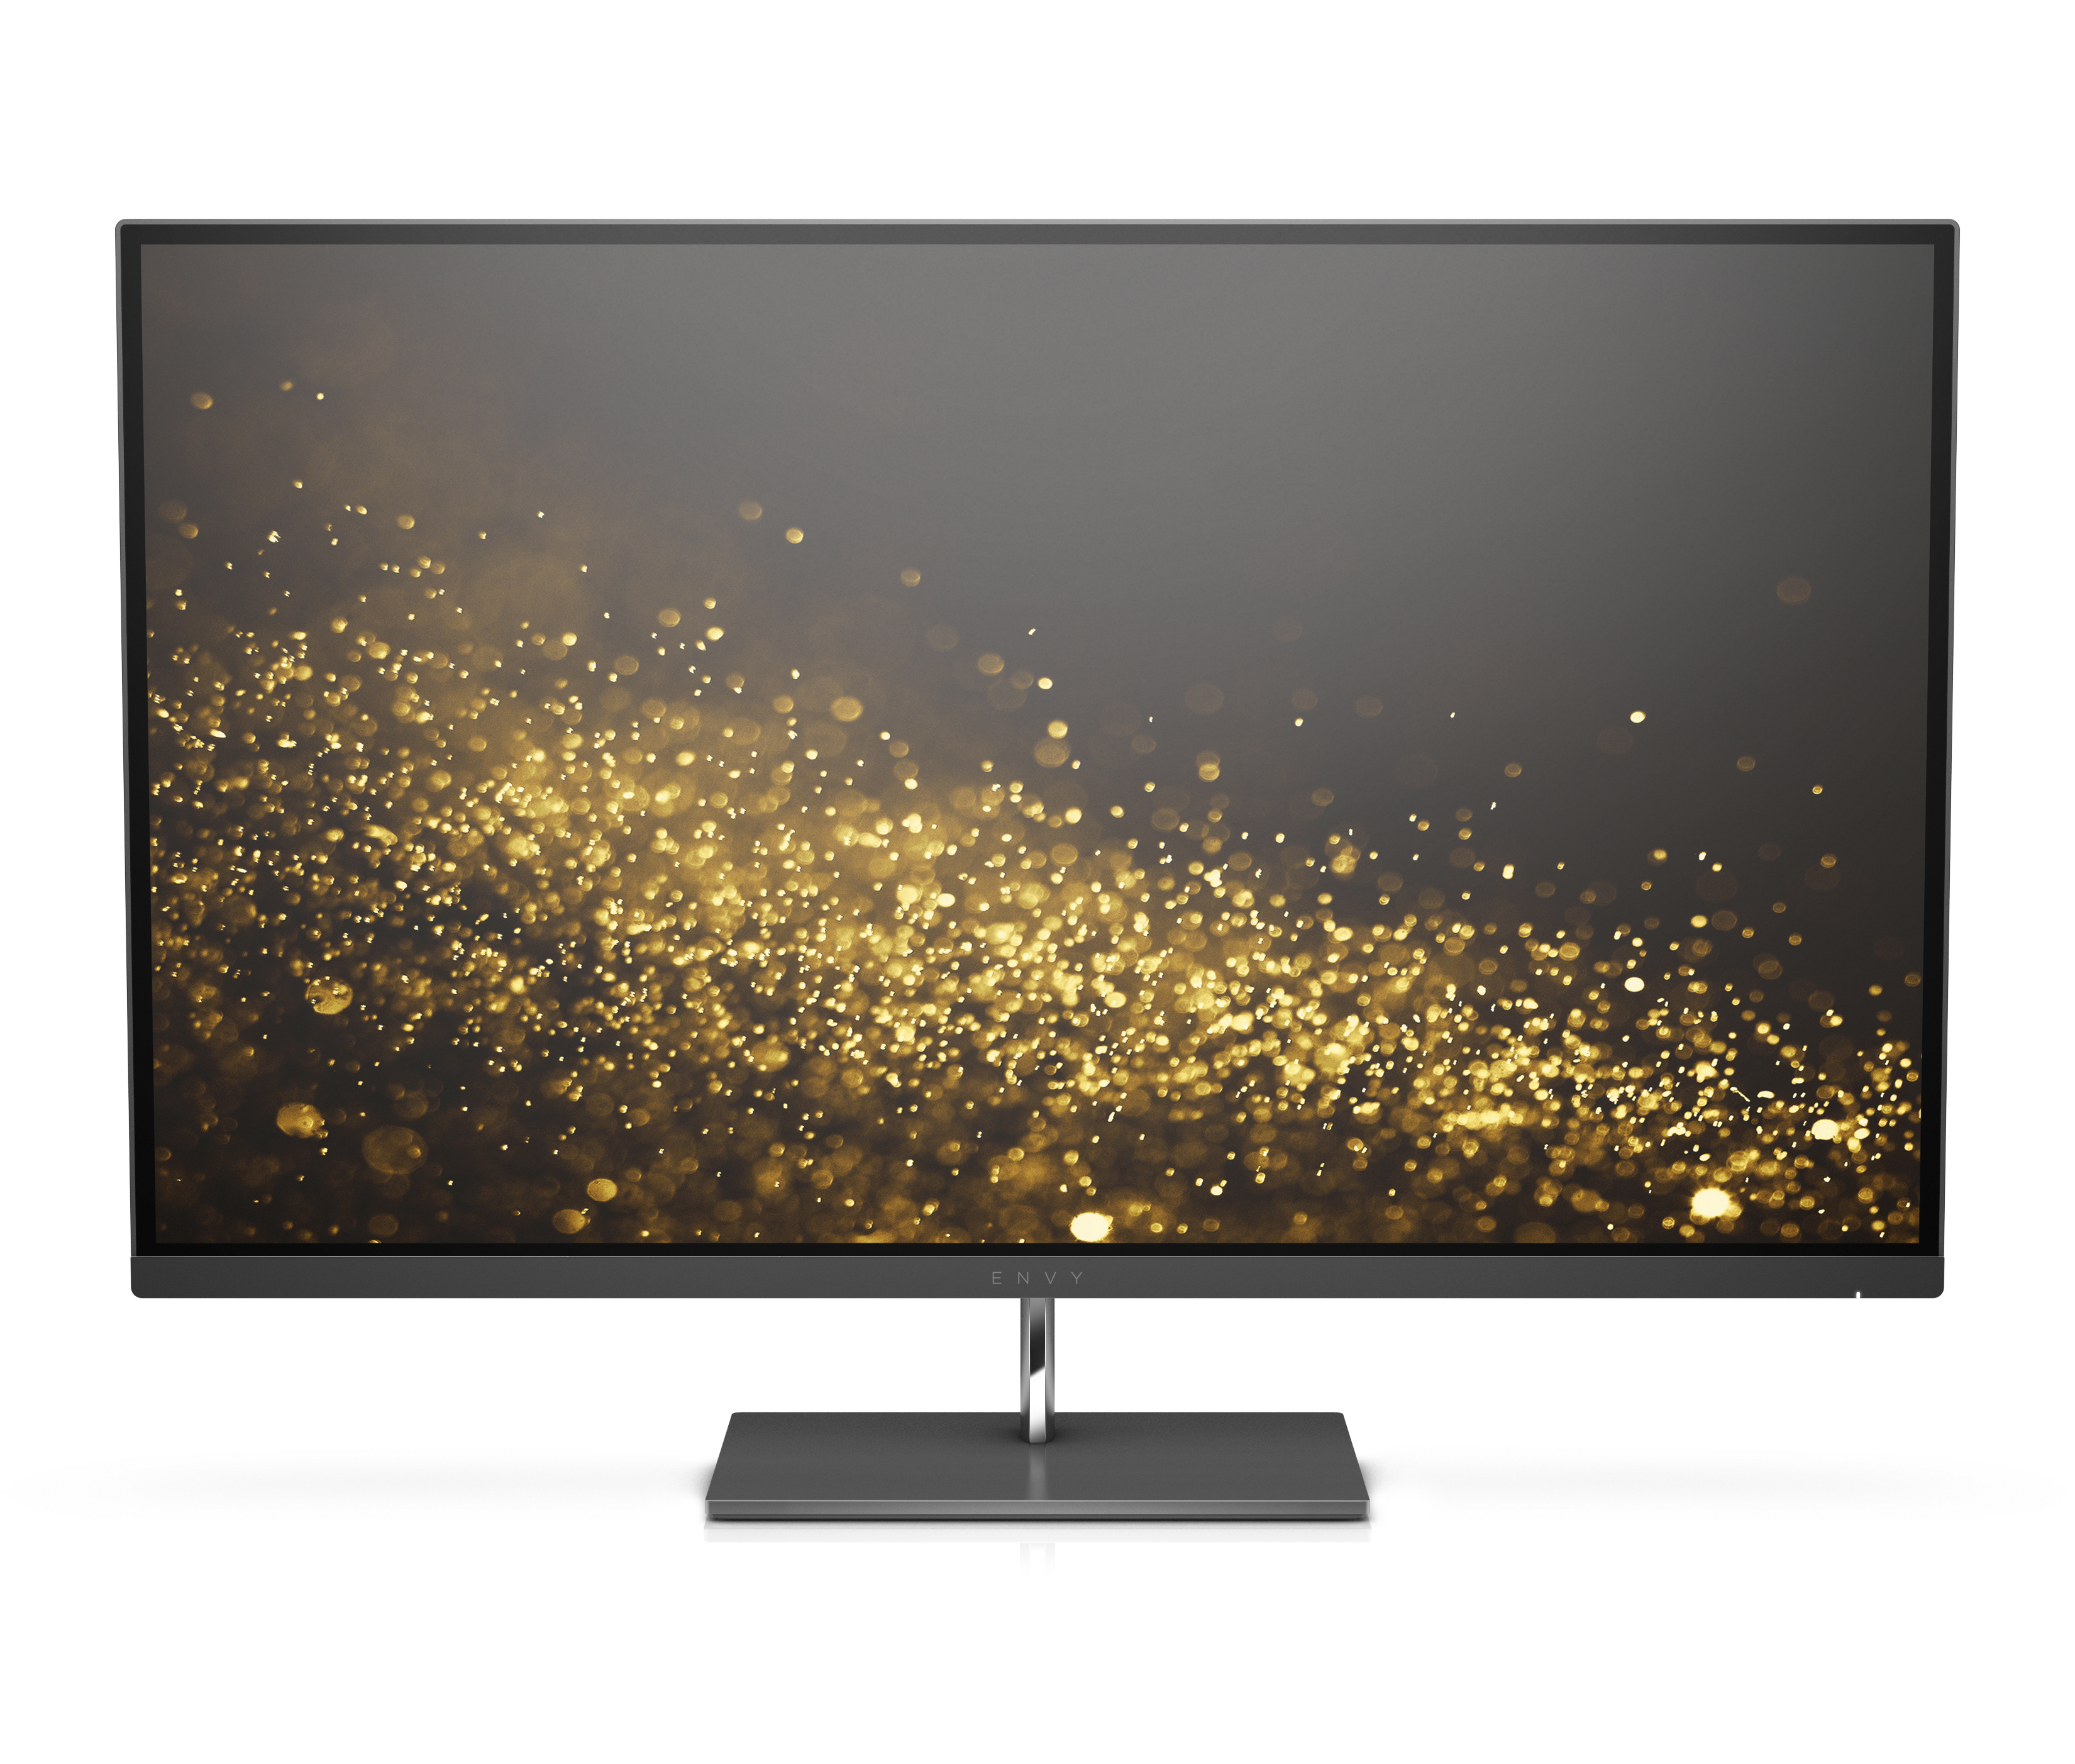 HP ENVY Display offers vibrant, 4K images